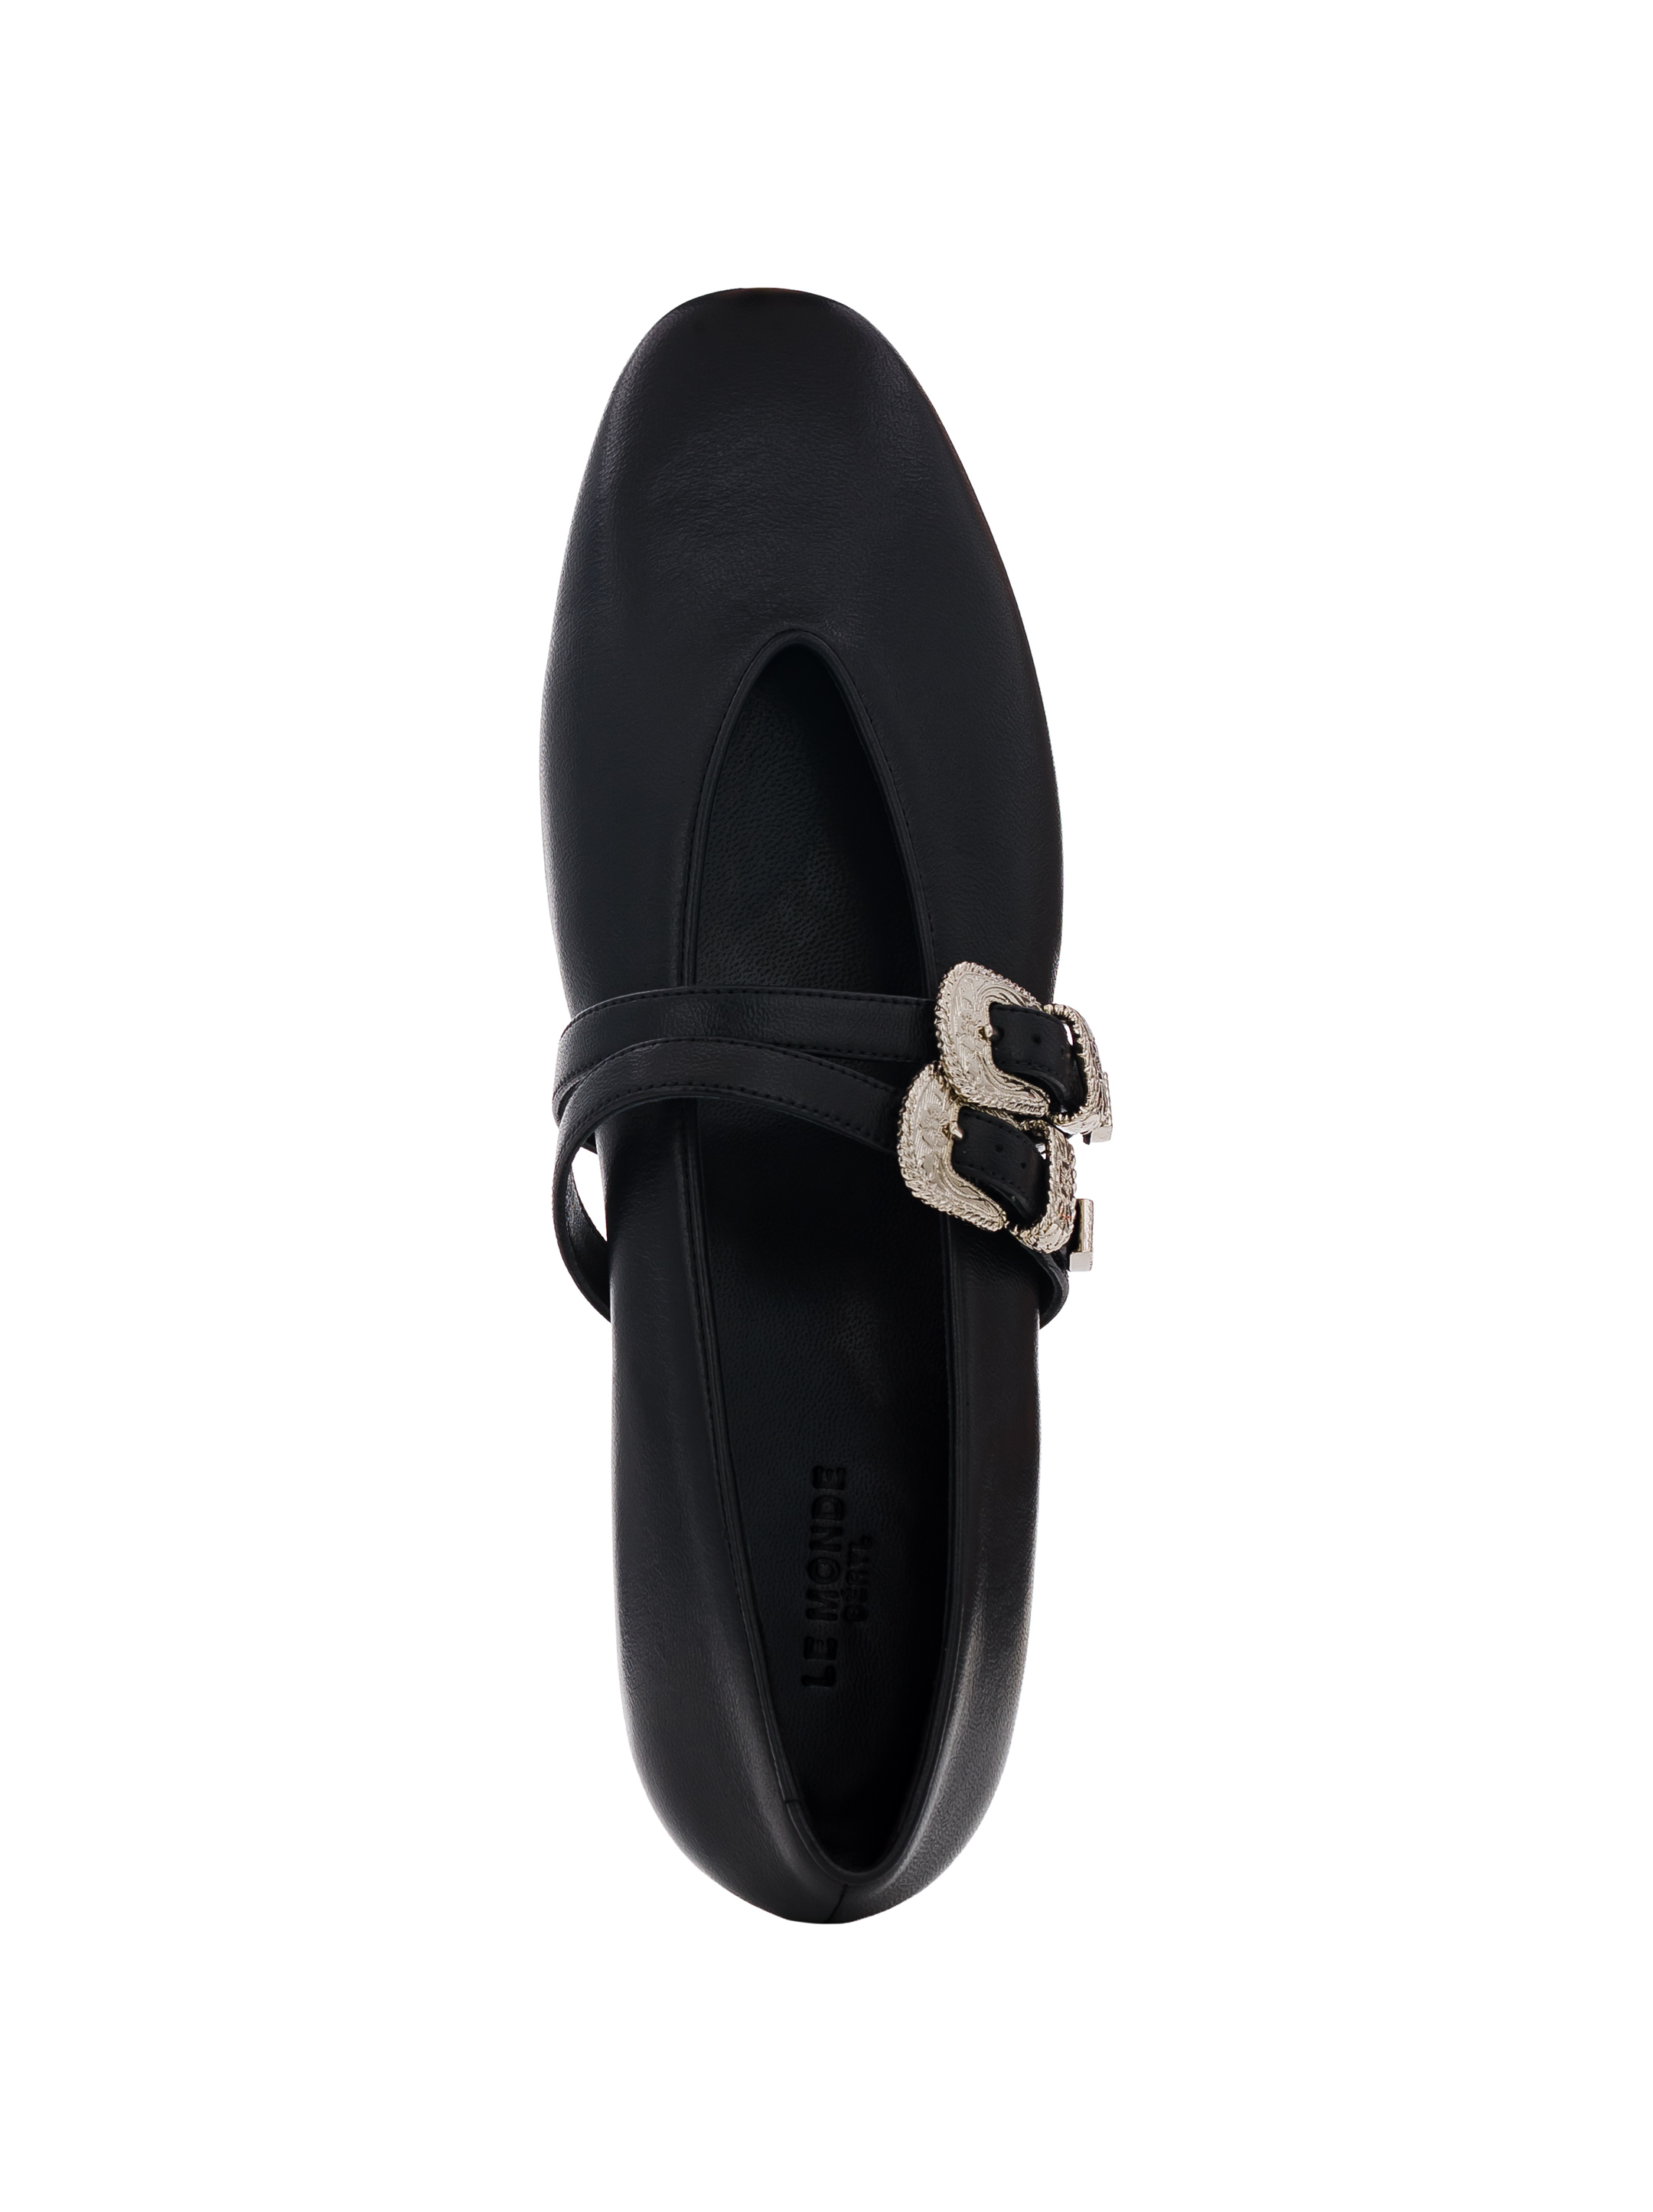 Claudia leather ballet flats